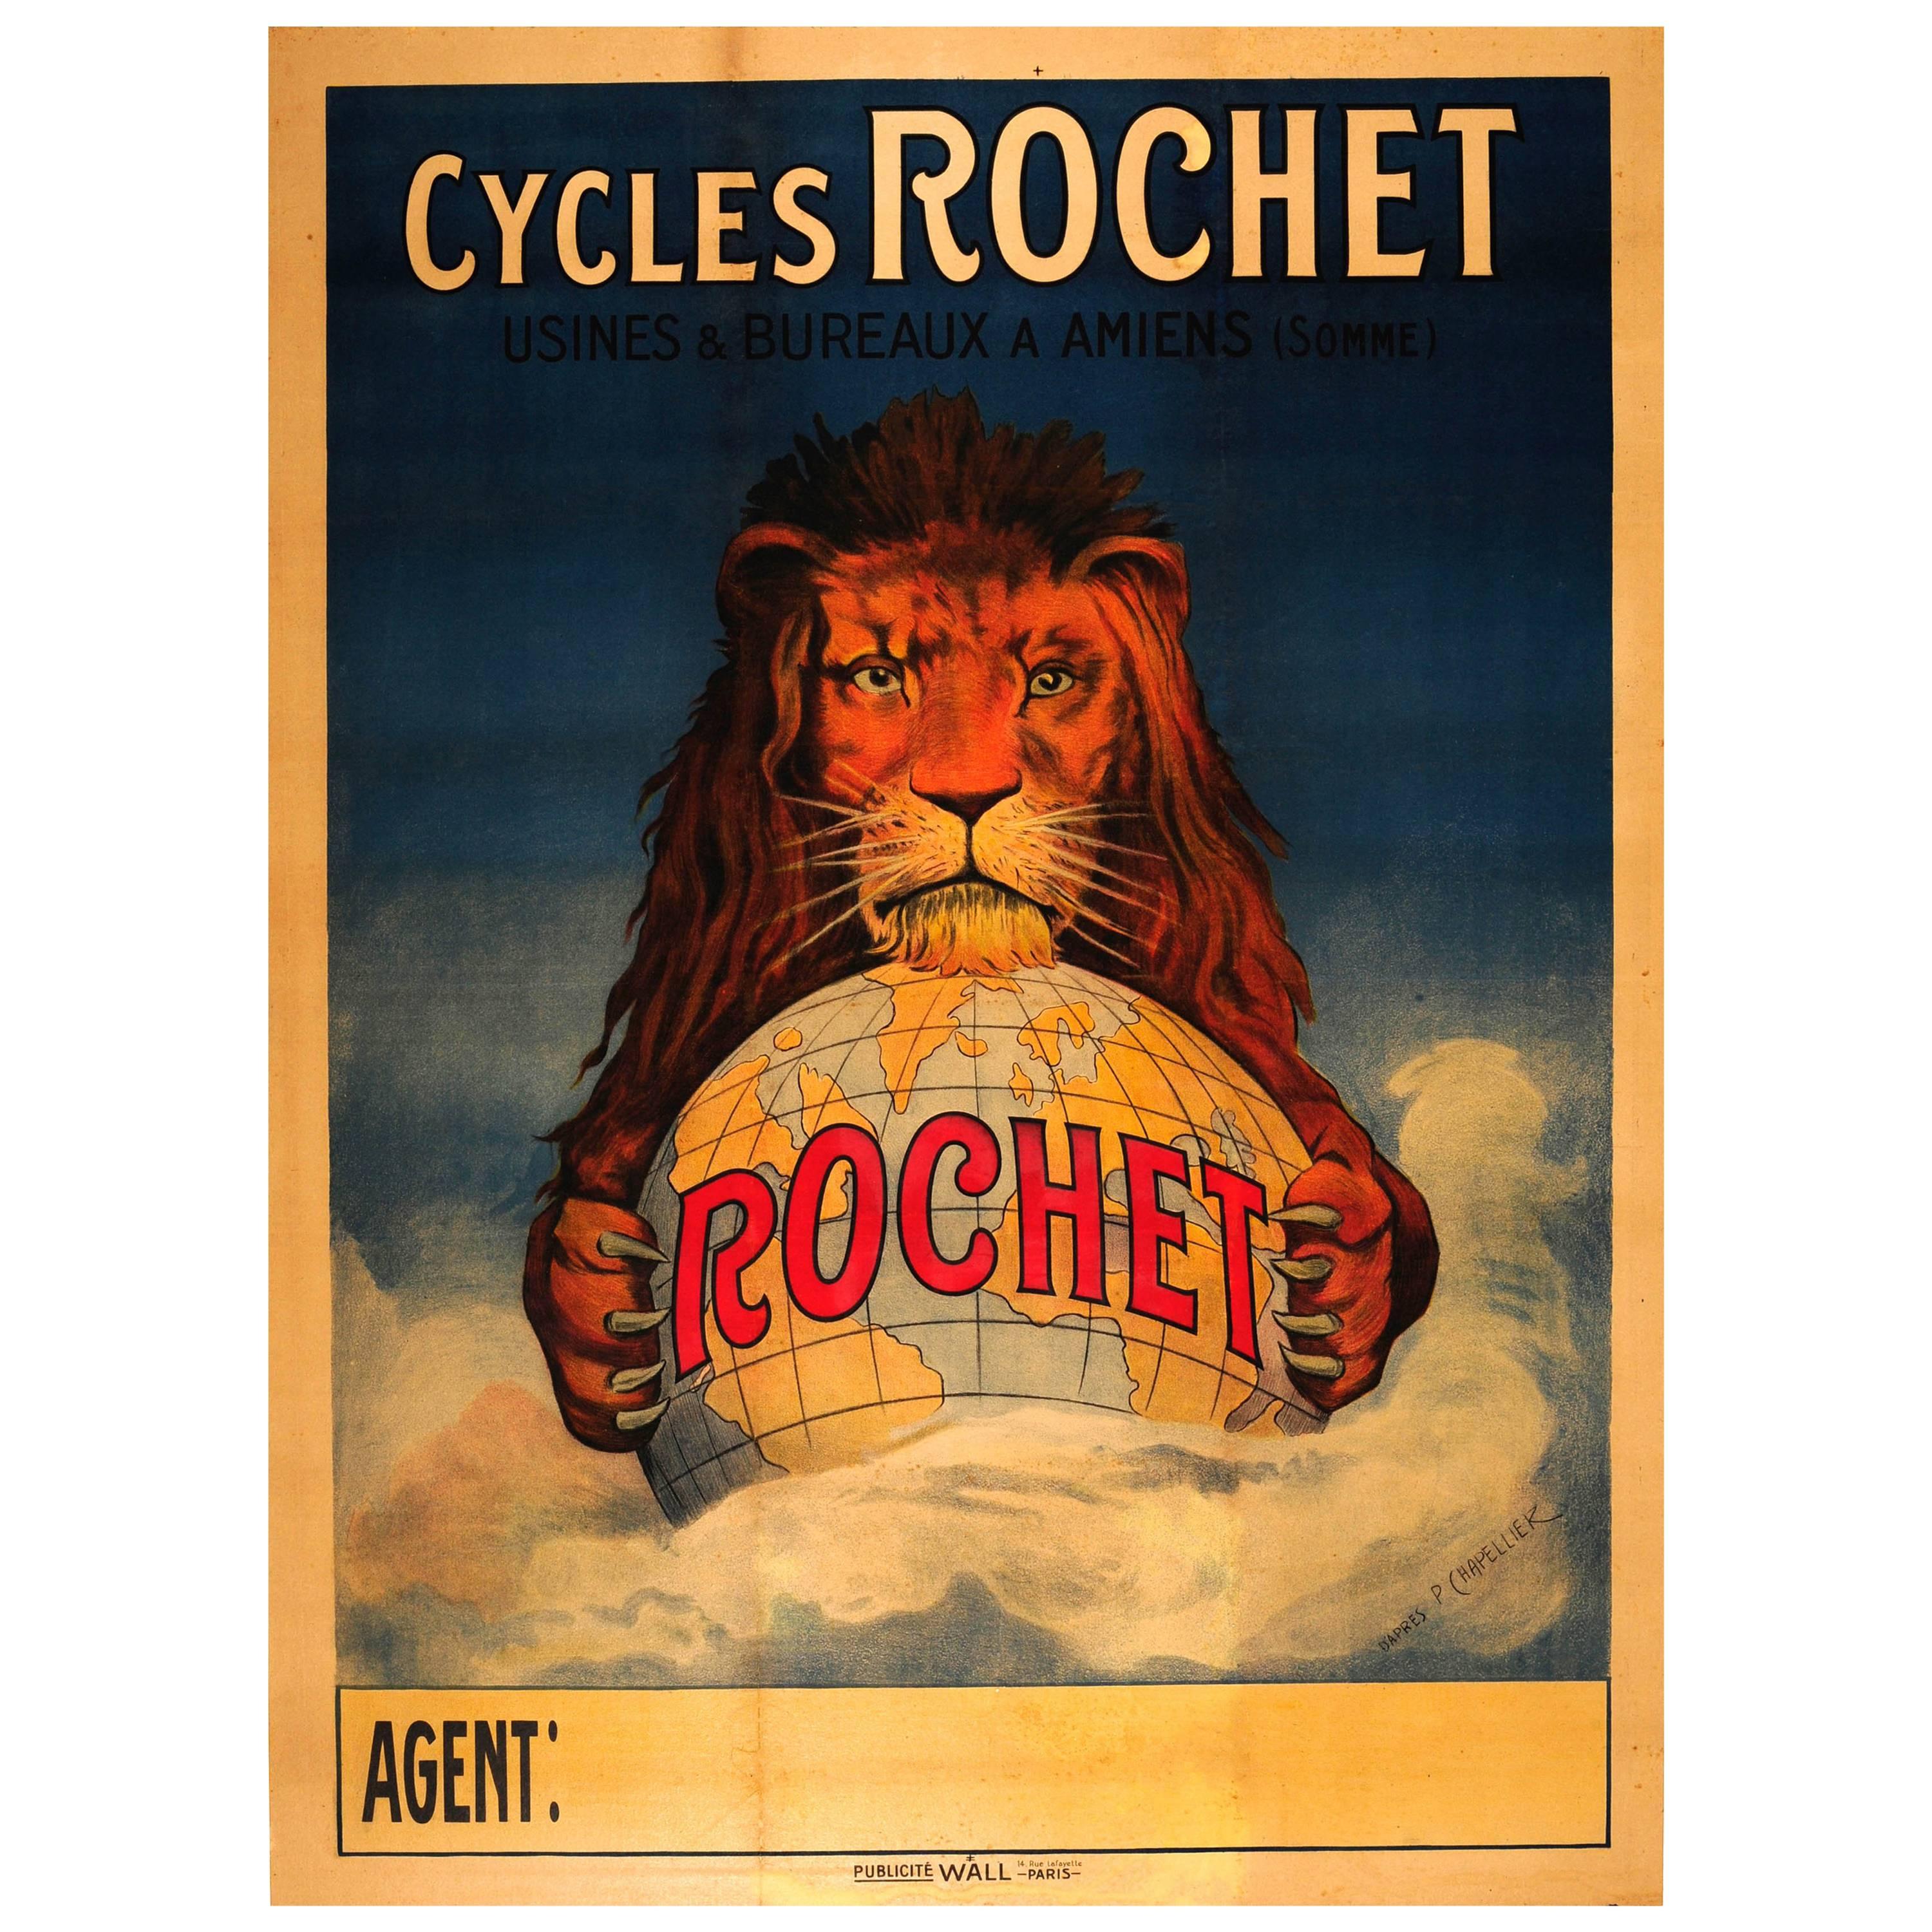 Original Antique Bicycle Advertising Poster by Chapellier - Cycles Rochet Amiens